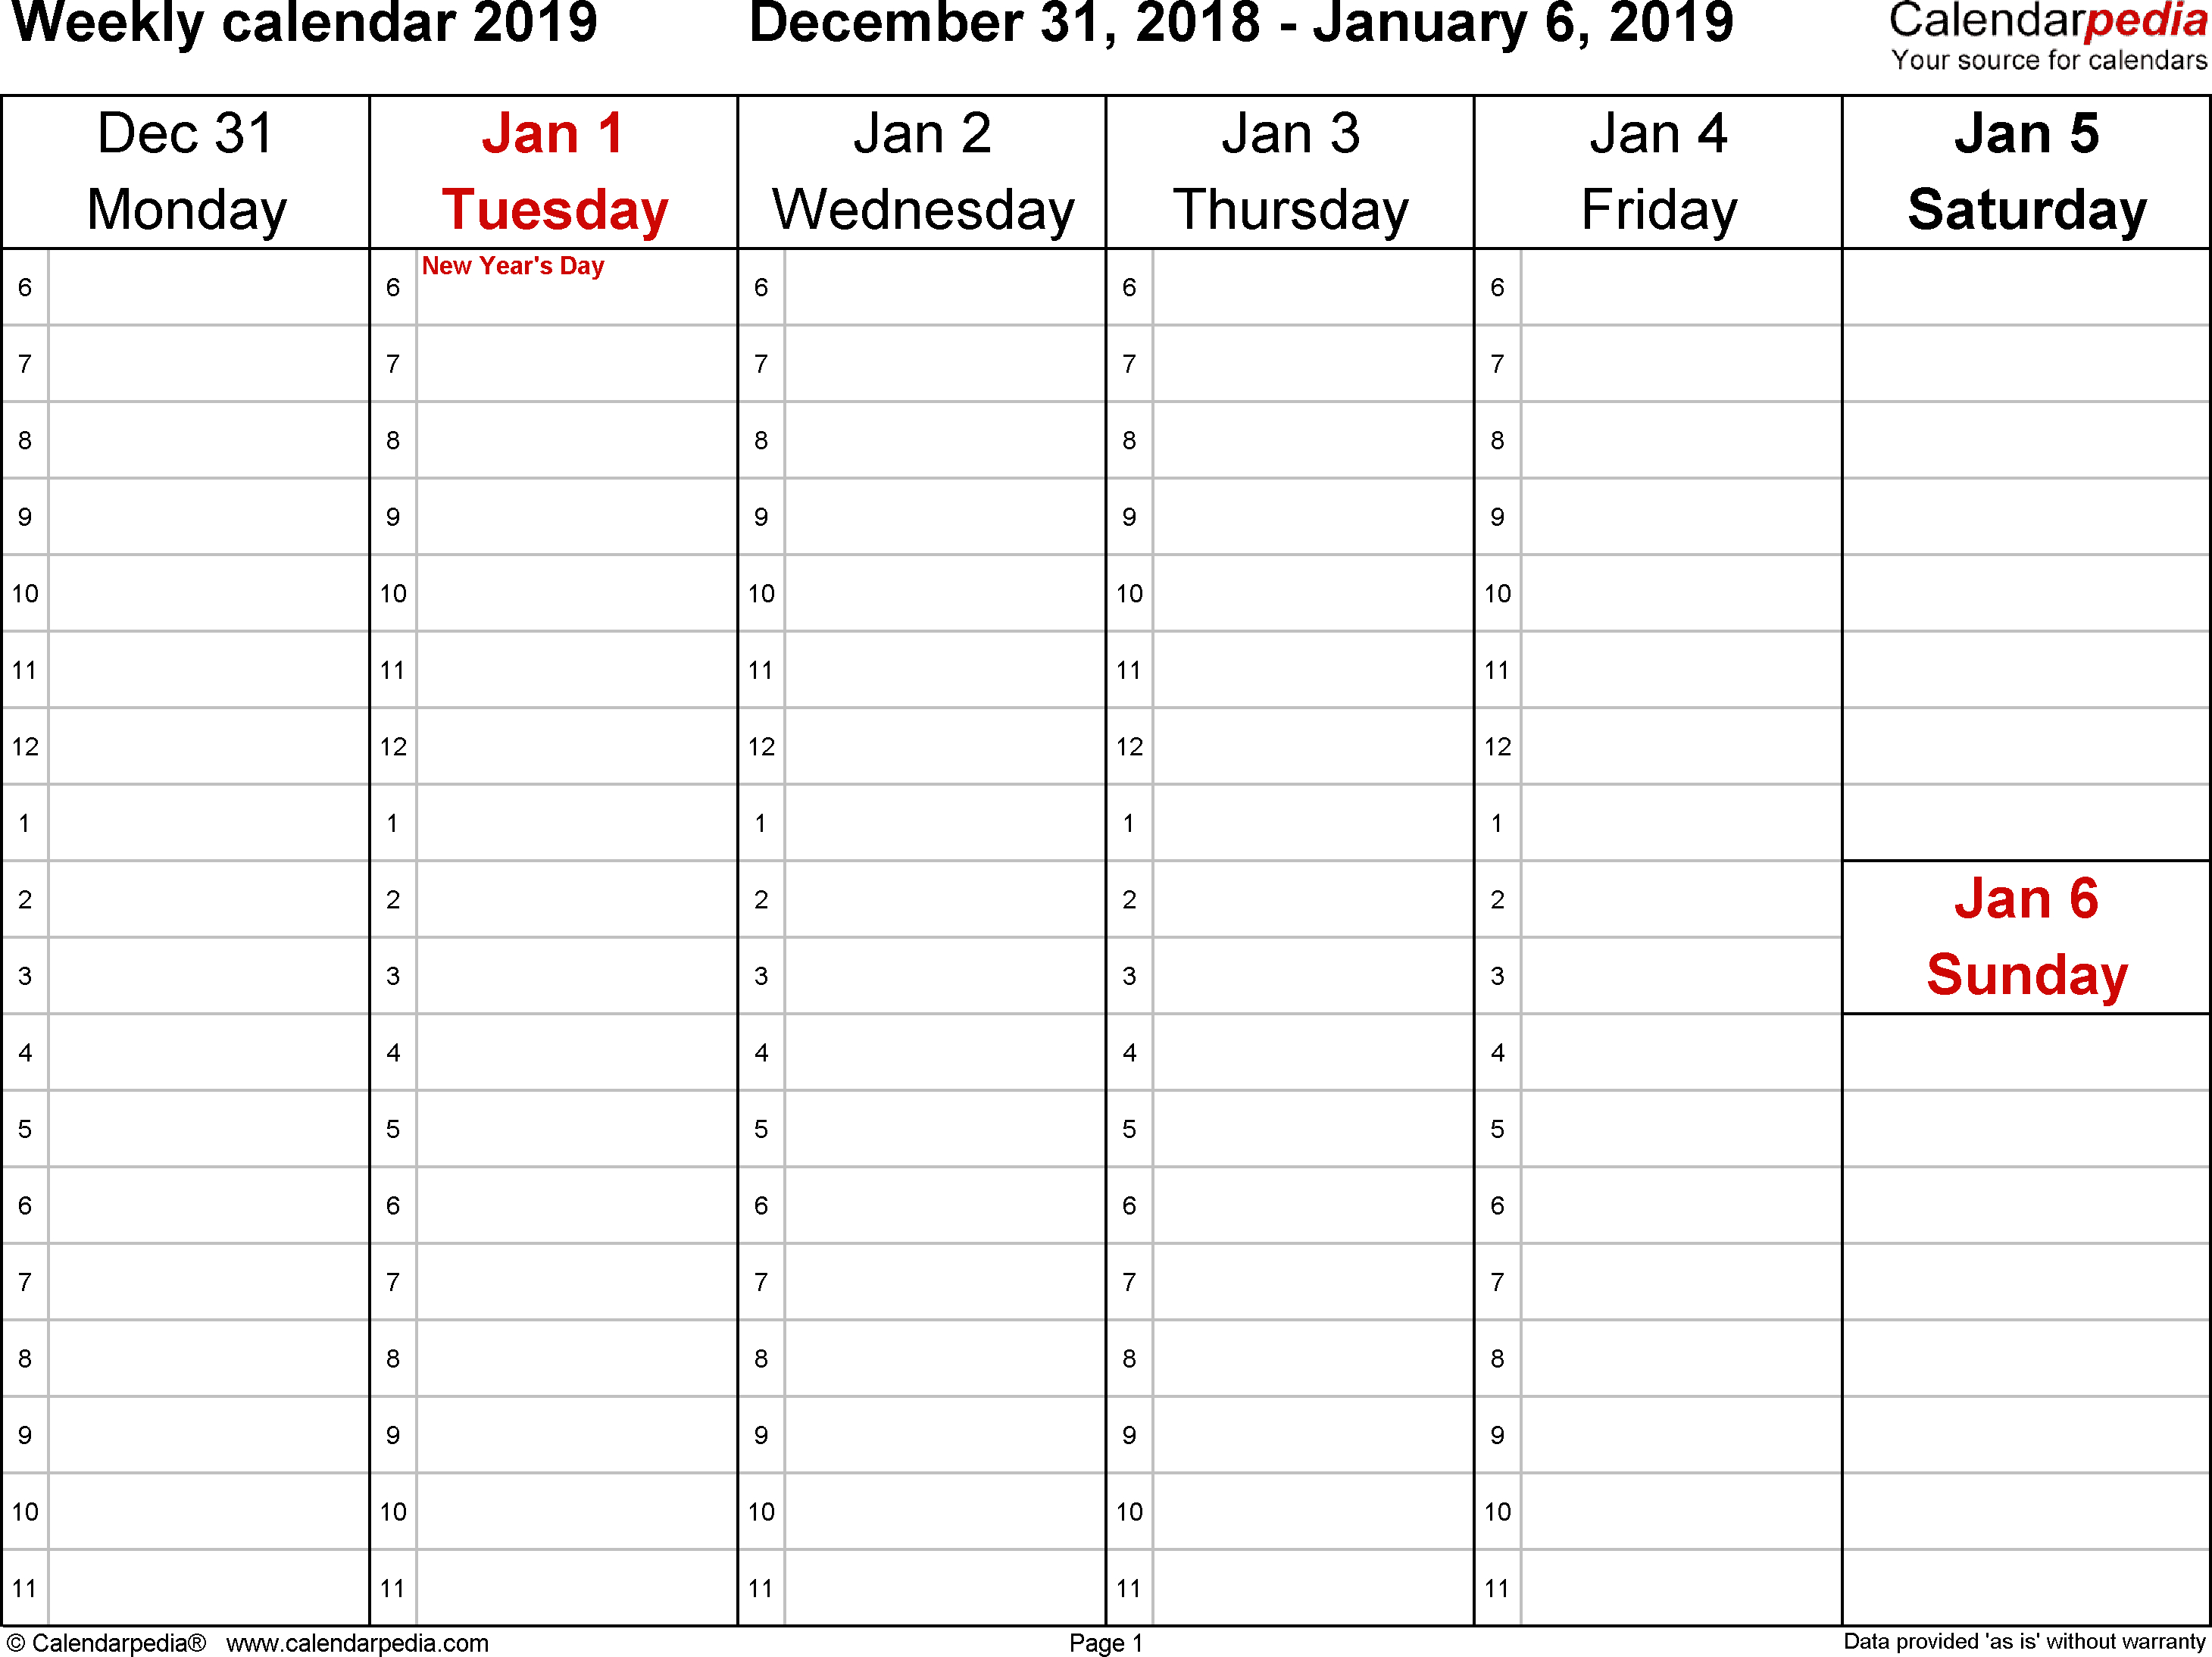 Weekly Calendar 2019 For Excel - 12 Free Printable Templates